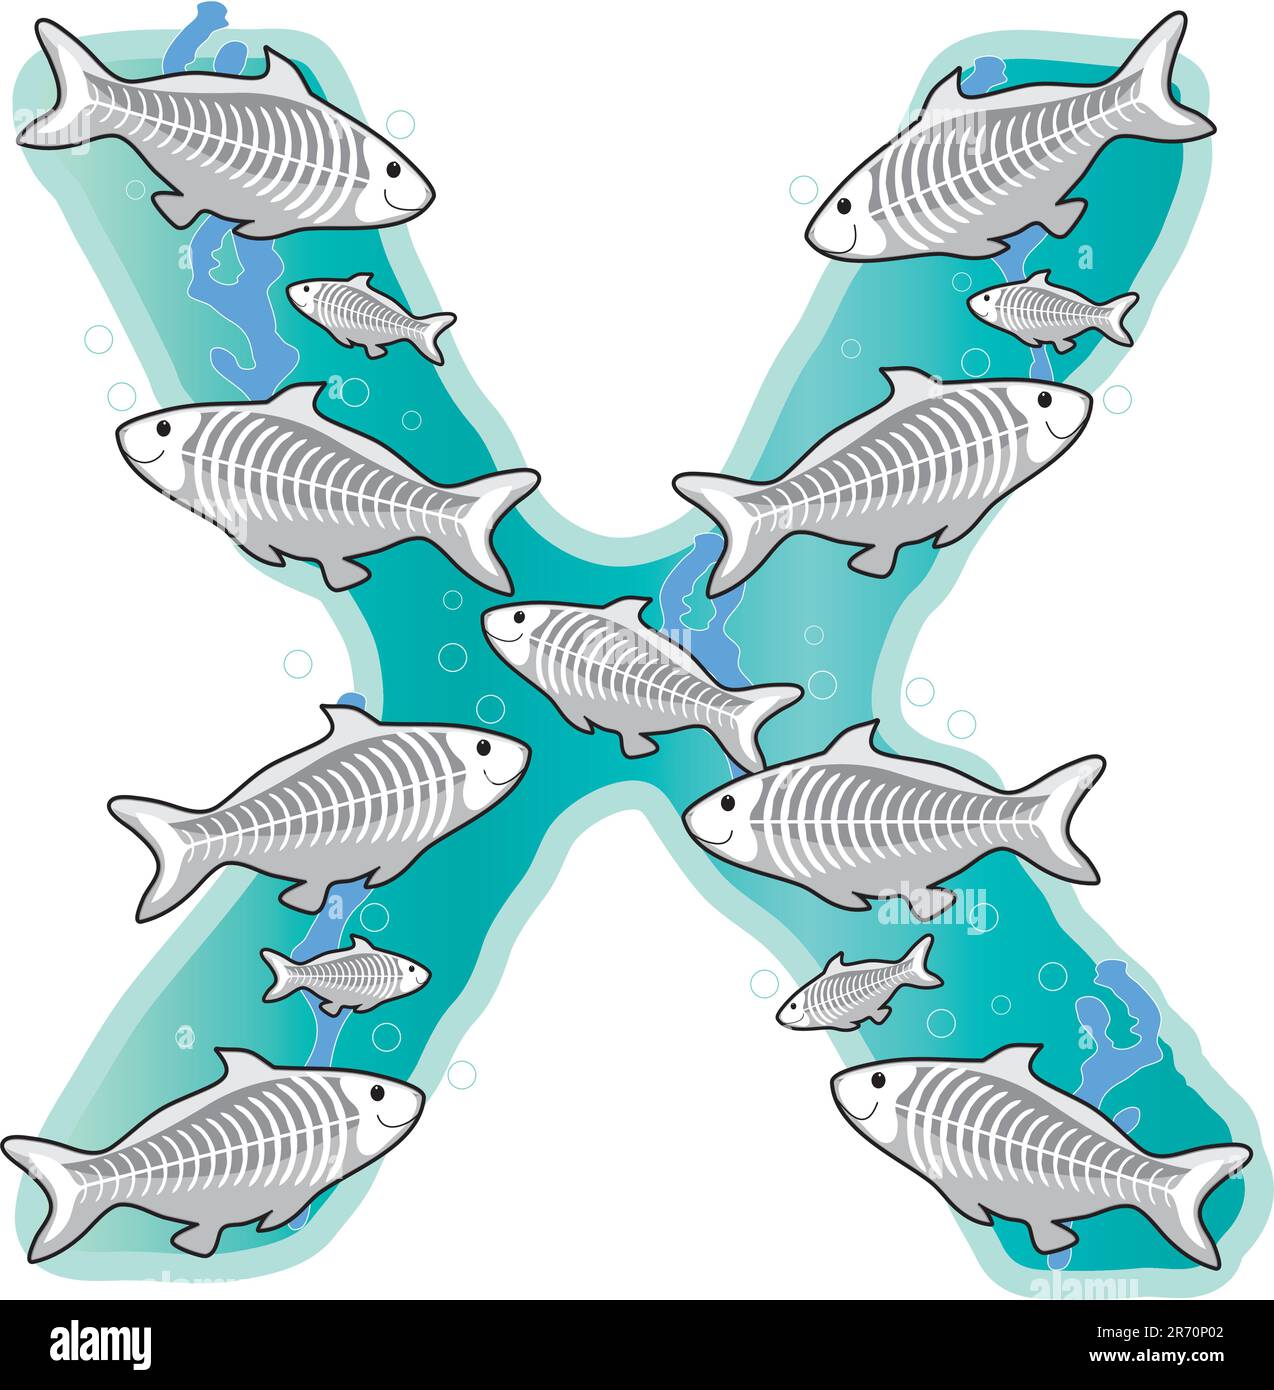 A school of X-Ray fish in the shape of the letter X Stock Vector